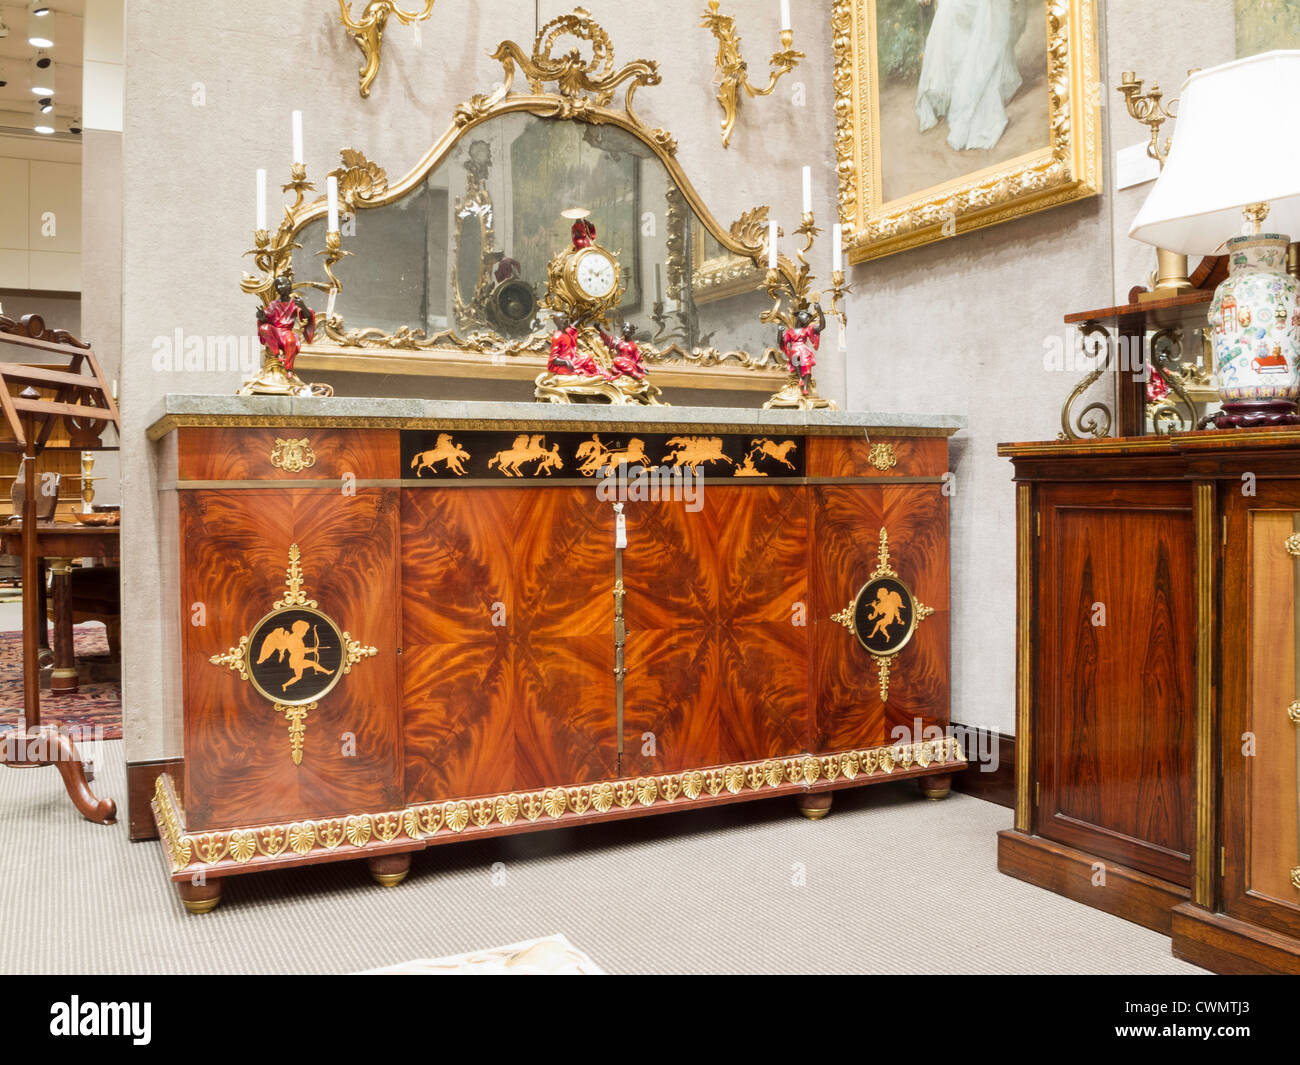 Display at Christie's Inc. Auction House, New York City Stock Photo